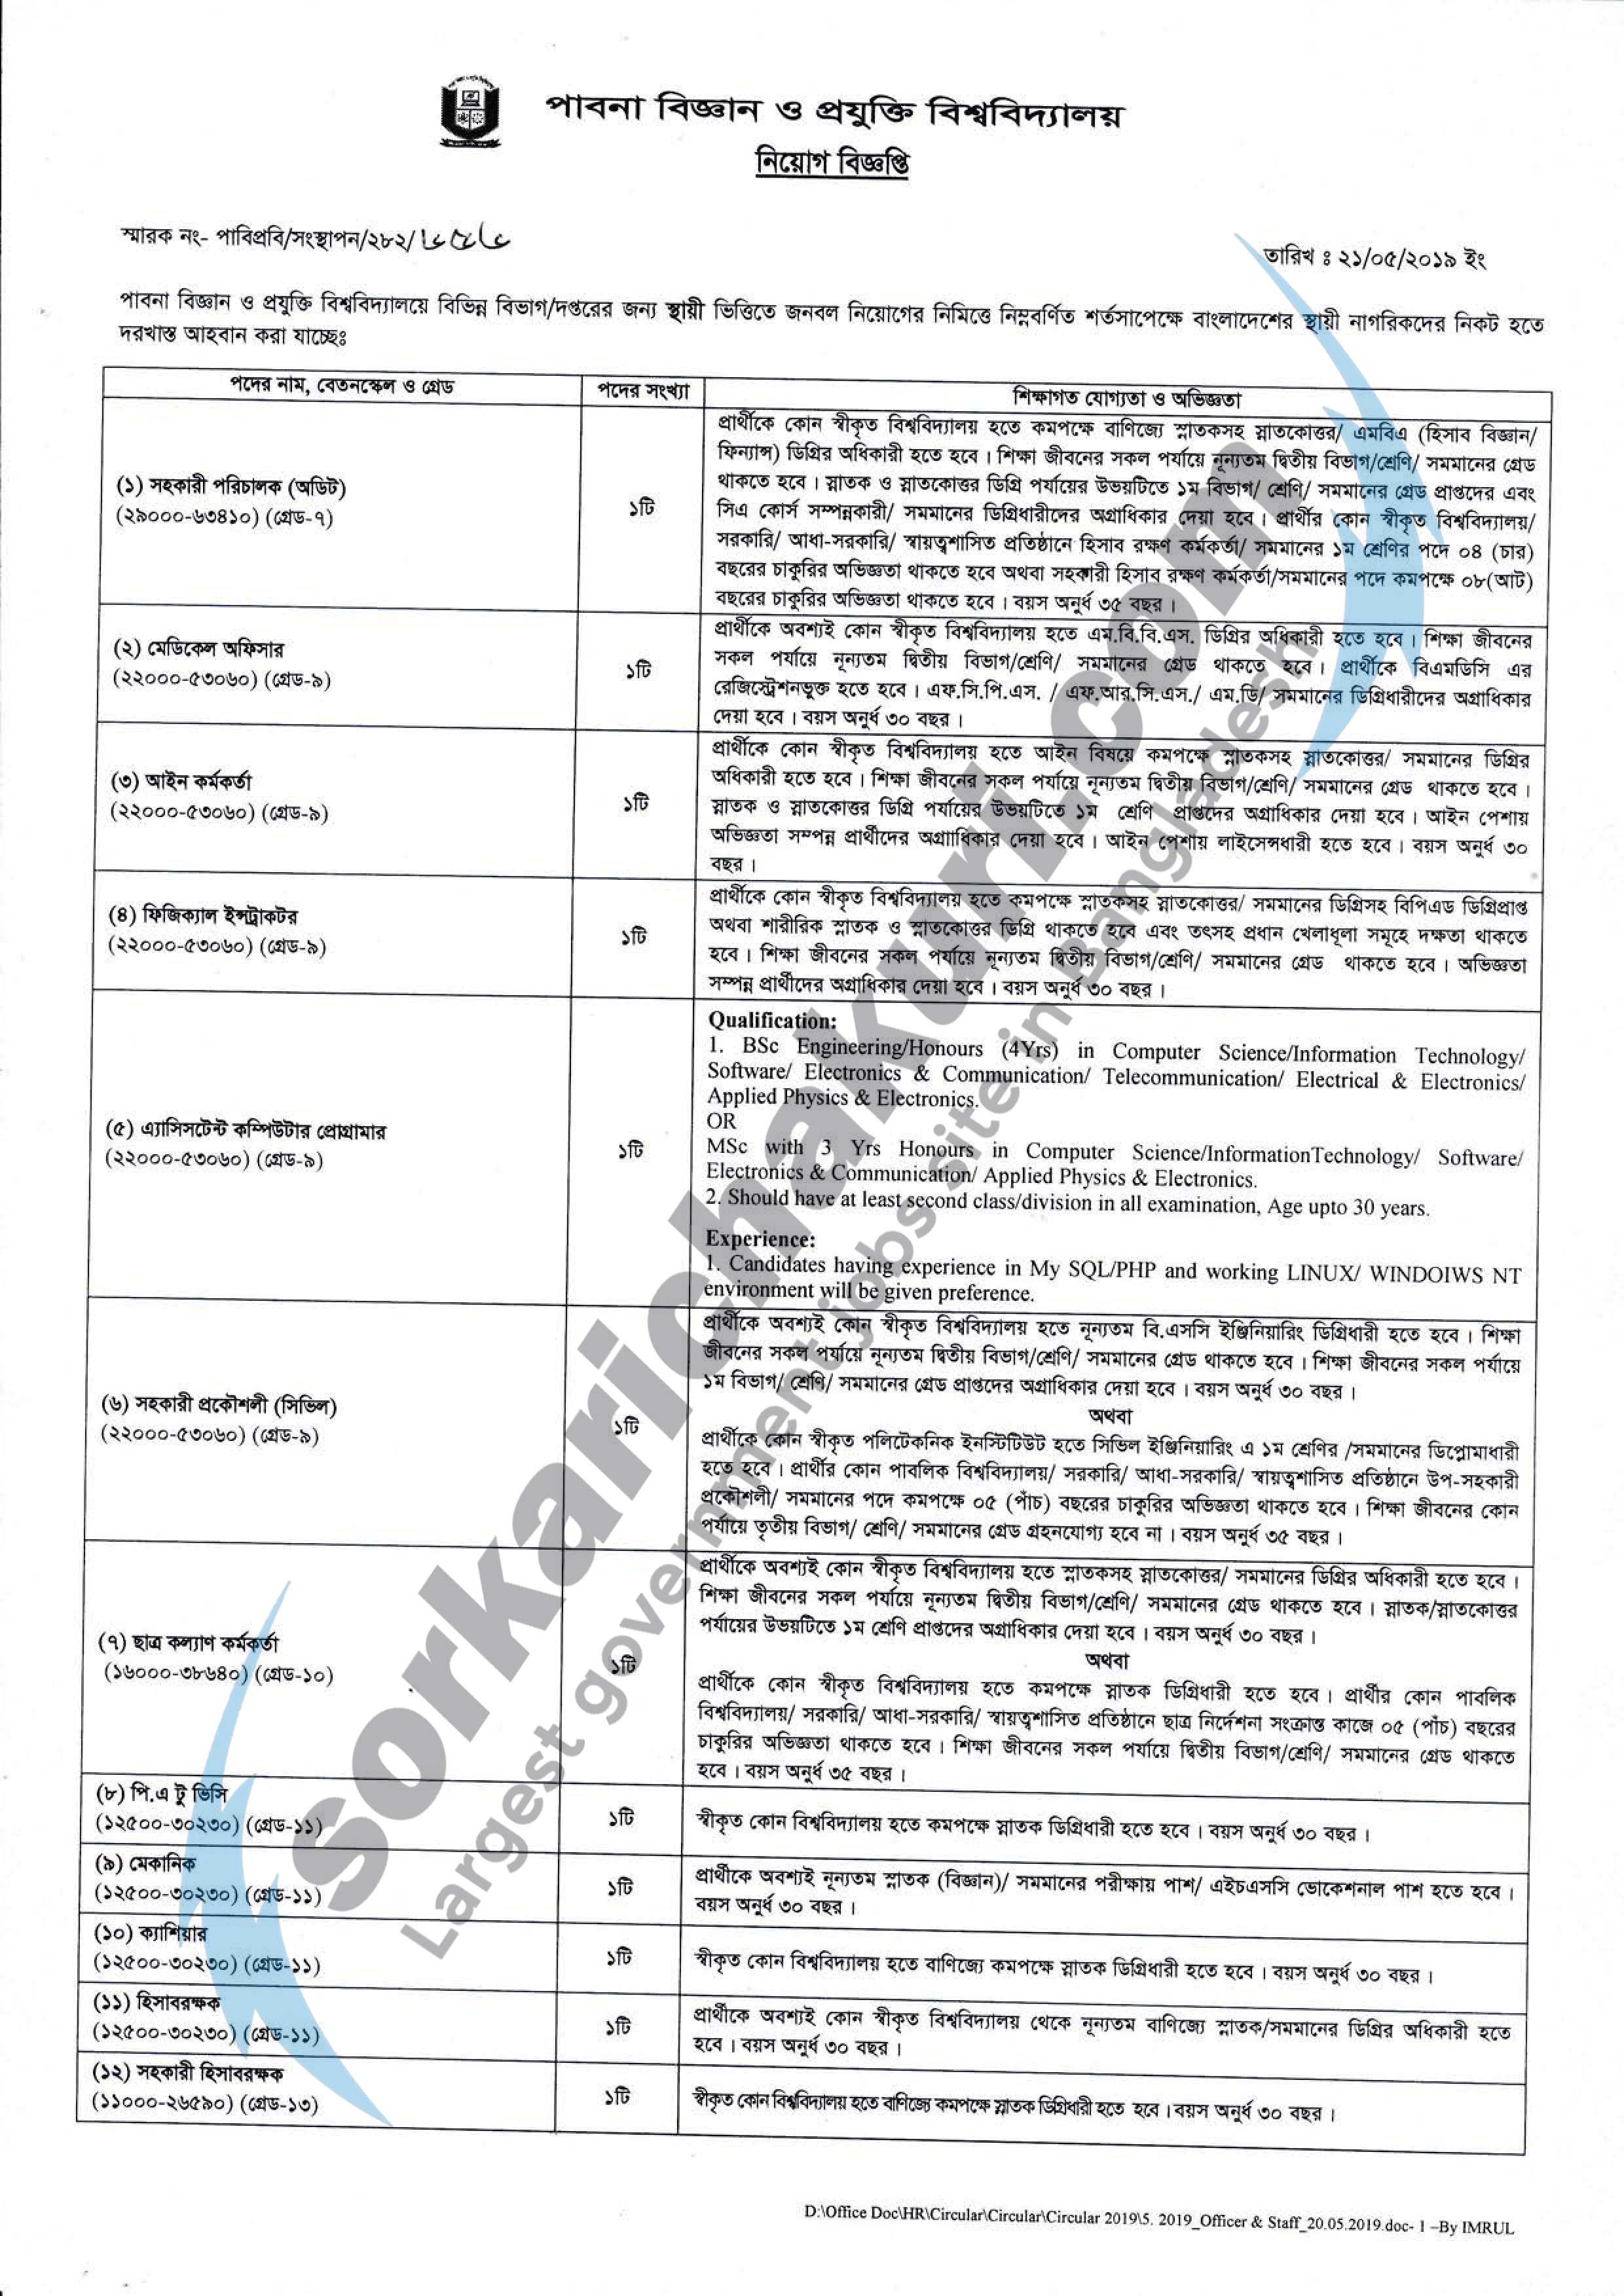 Pabna University of Science and Technology Jobs Circular 2019